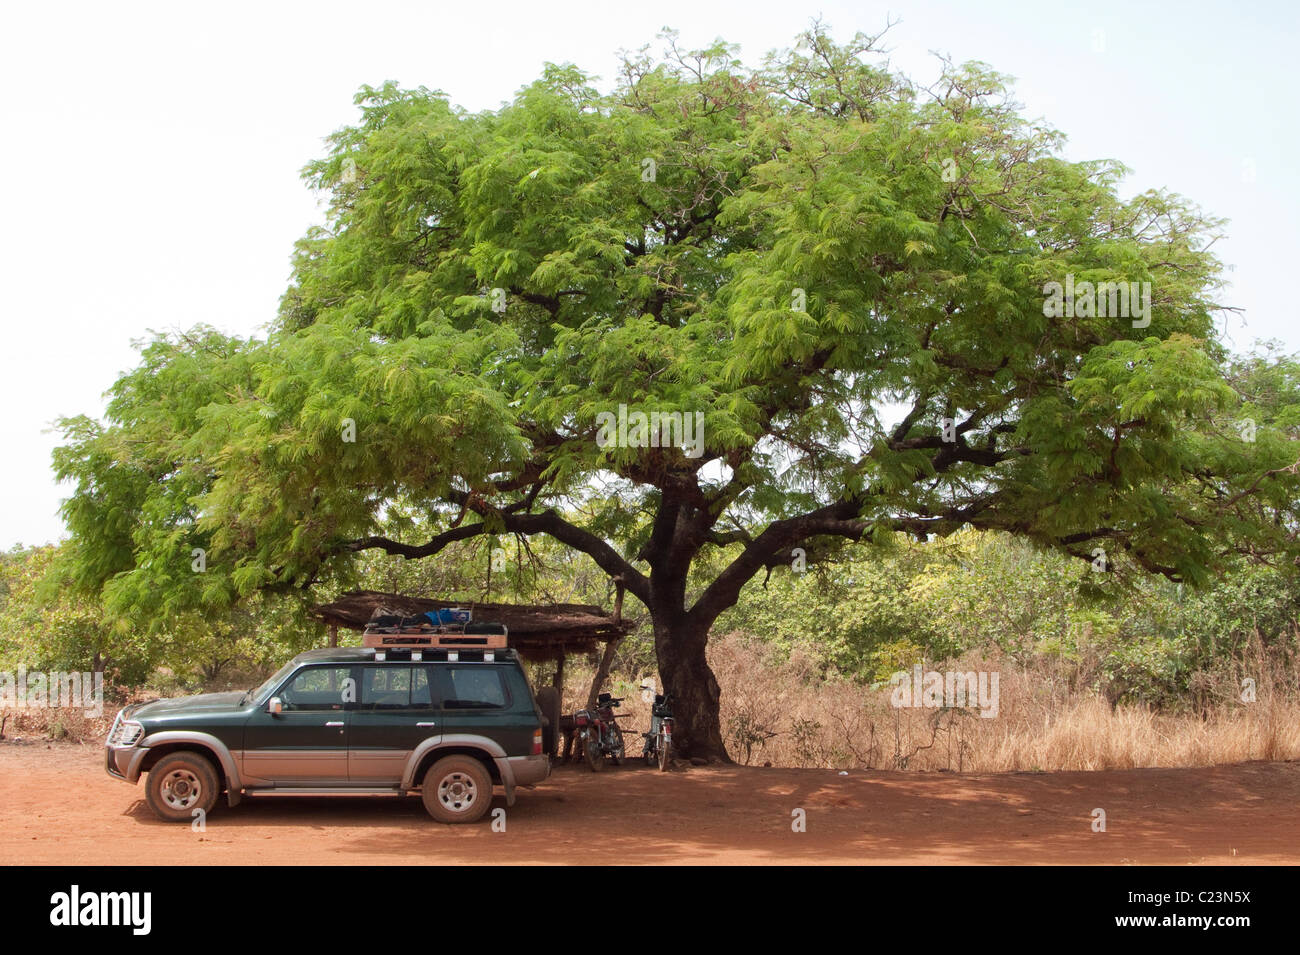 A Toyota stopped in the shade of an acacia tree on the route between Banfora and Bobo Dioulasso, Burkina Faso Stock Photo